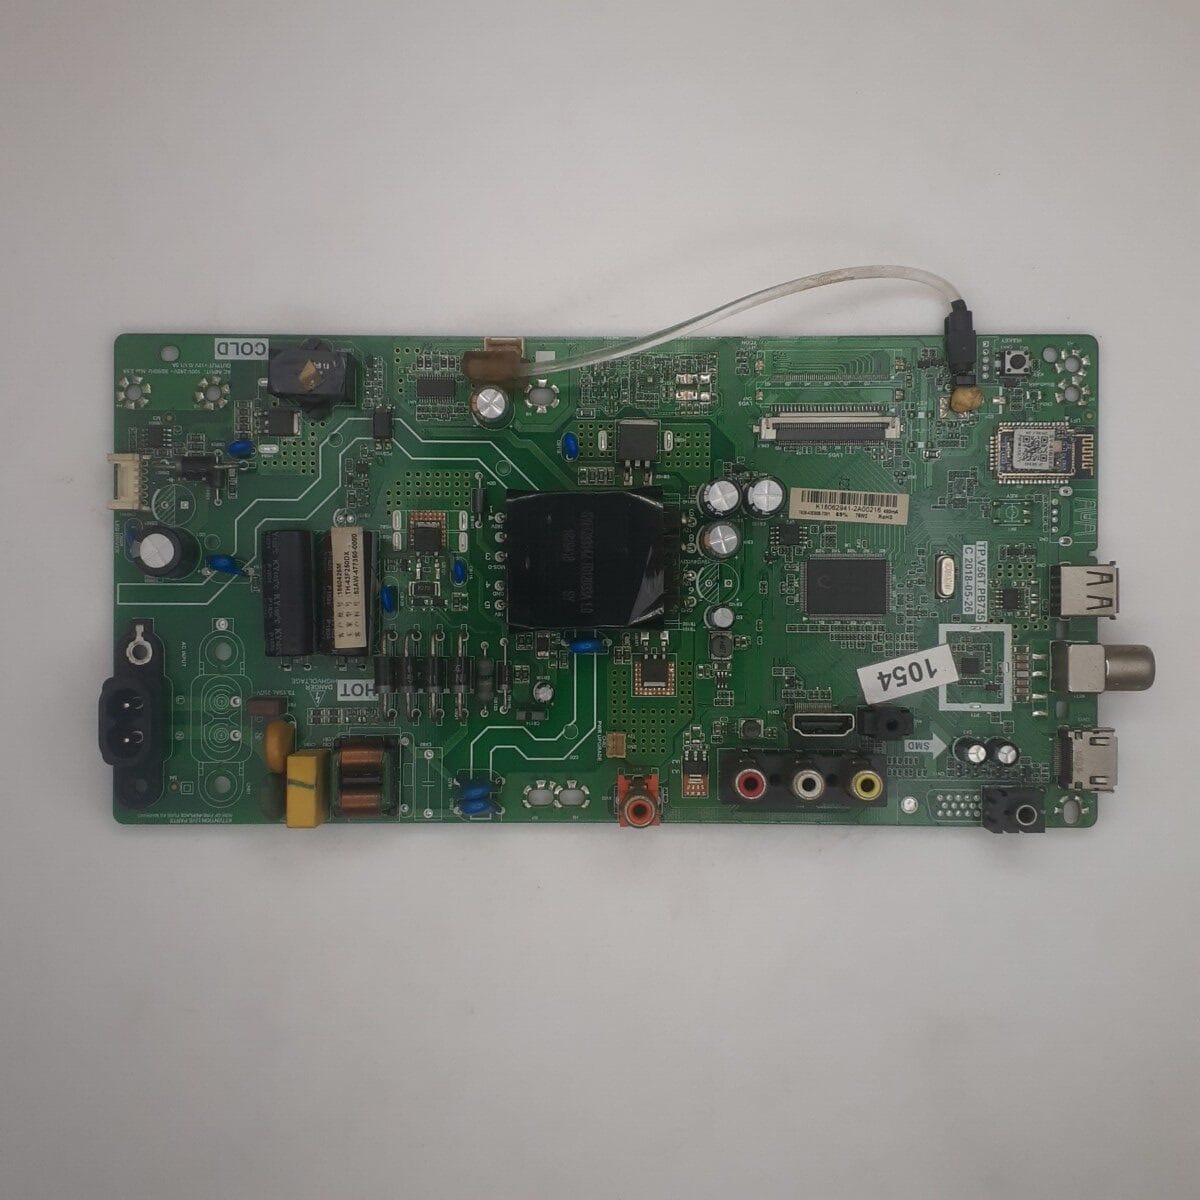 TH43F250DX PANASONIC MOTHERBOARD FOR LED TV